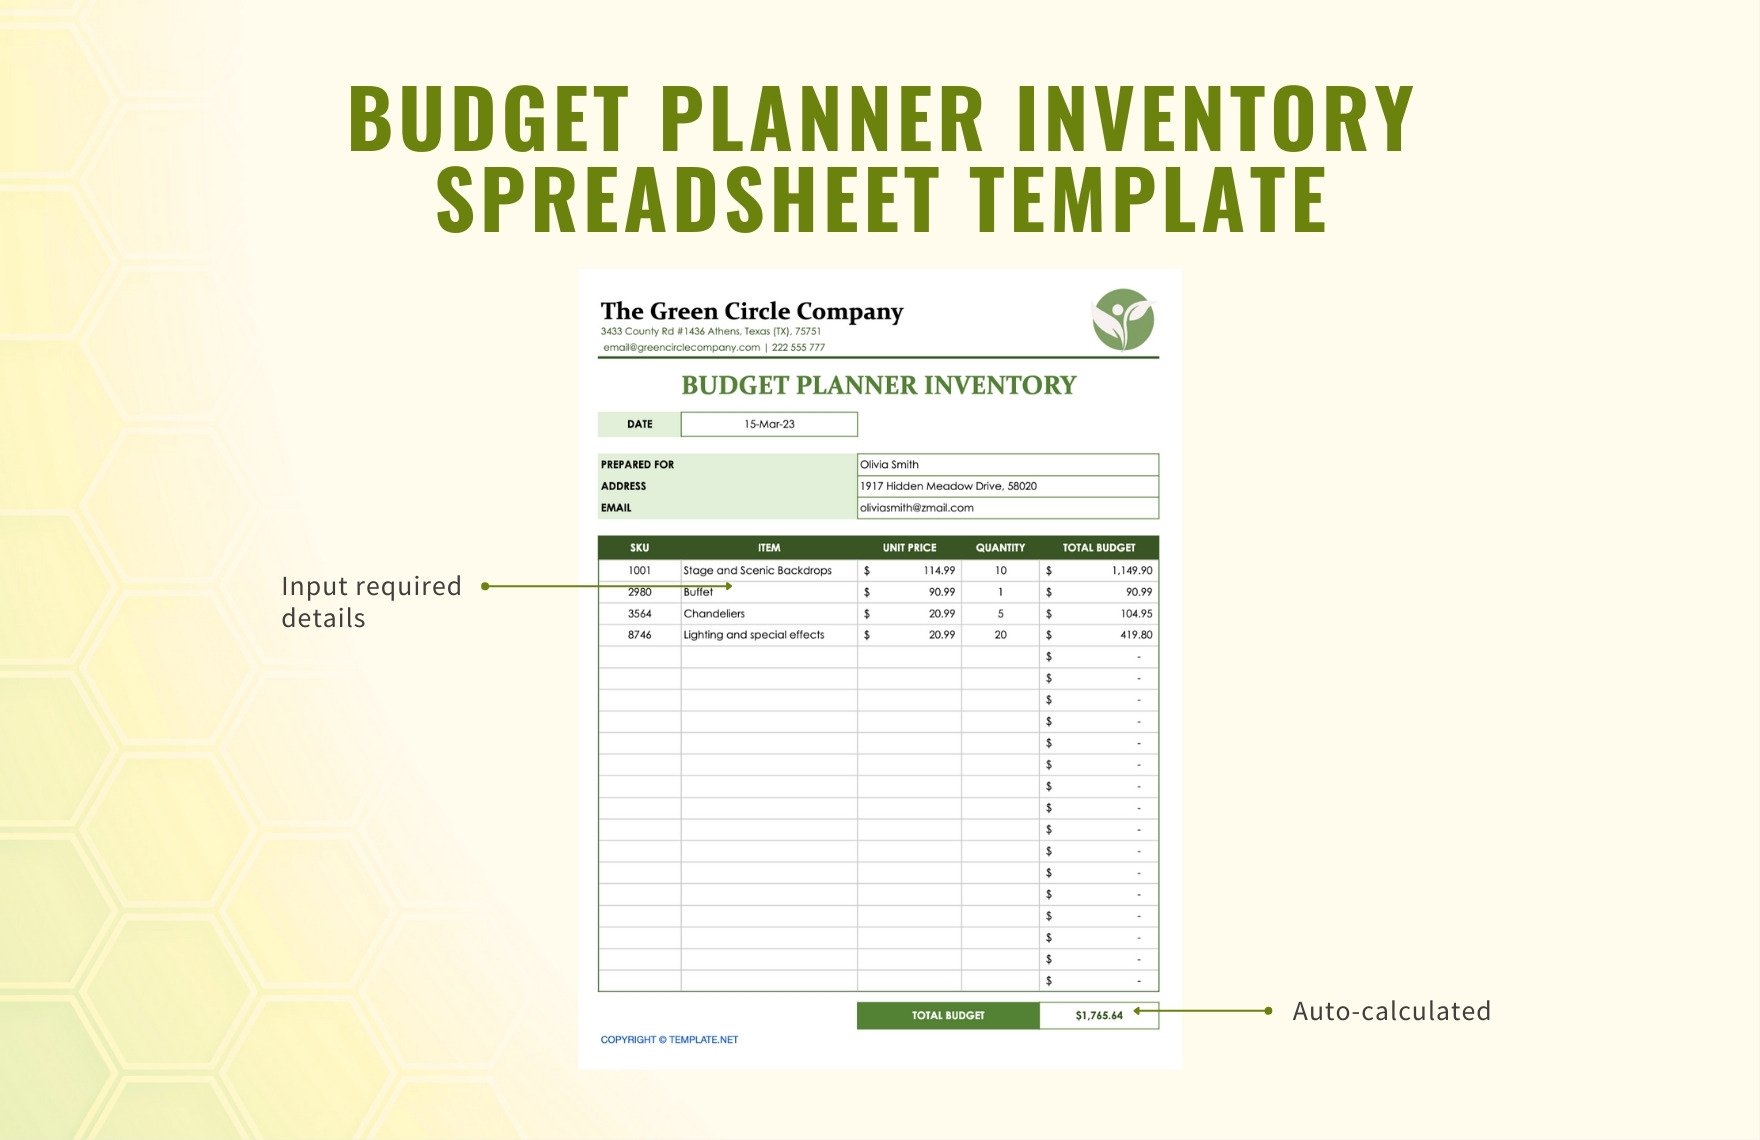 Budget Planner Inventory Spreadsheet Template